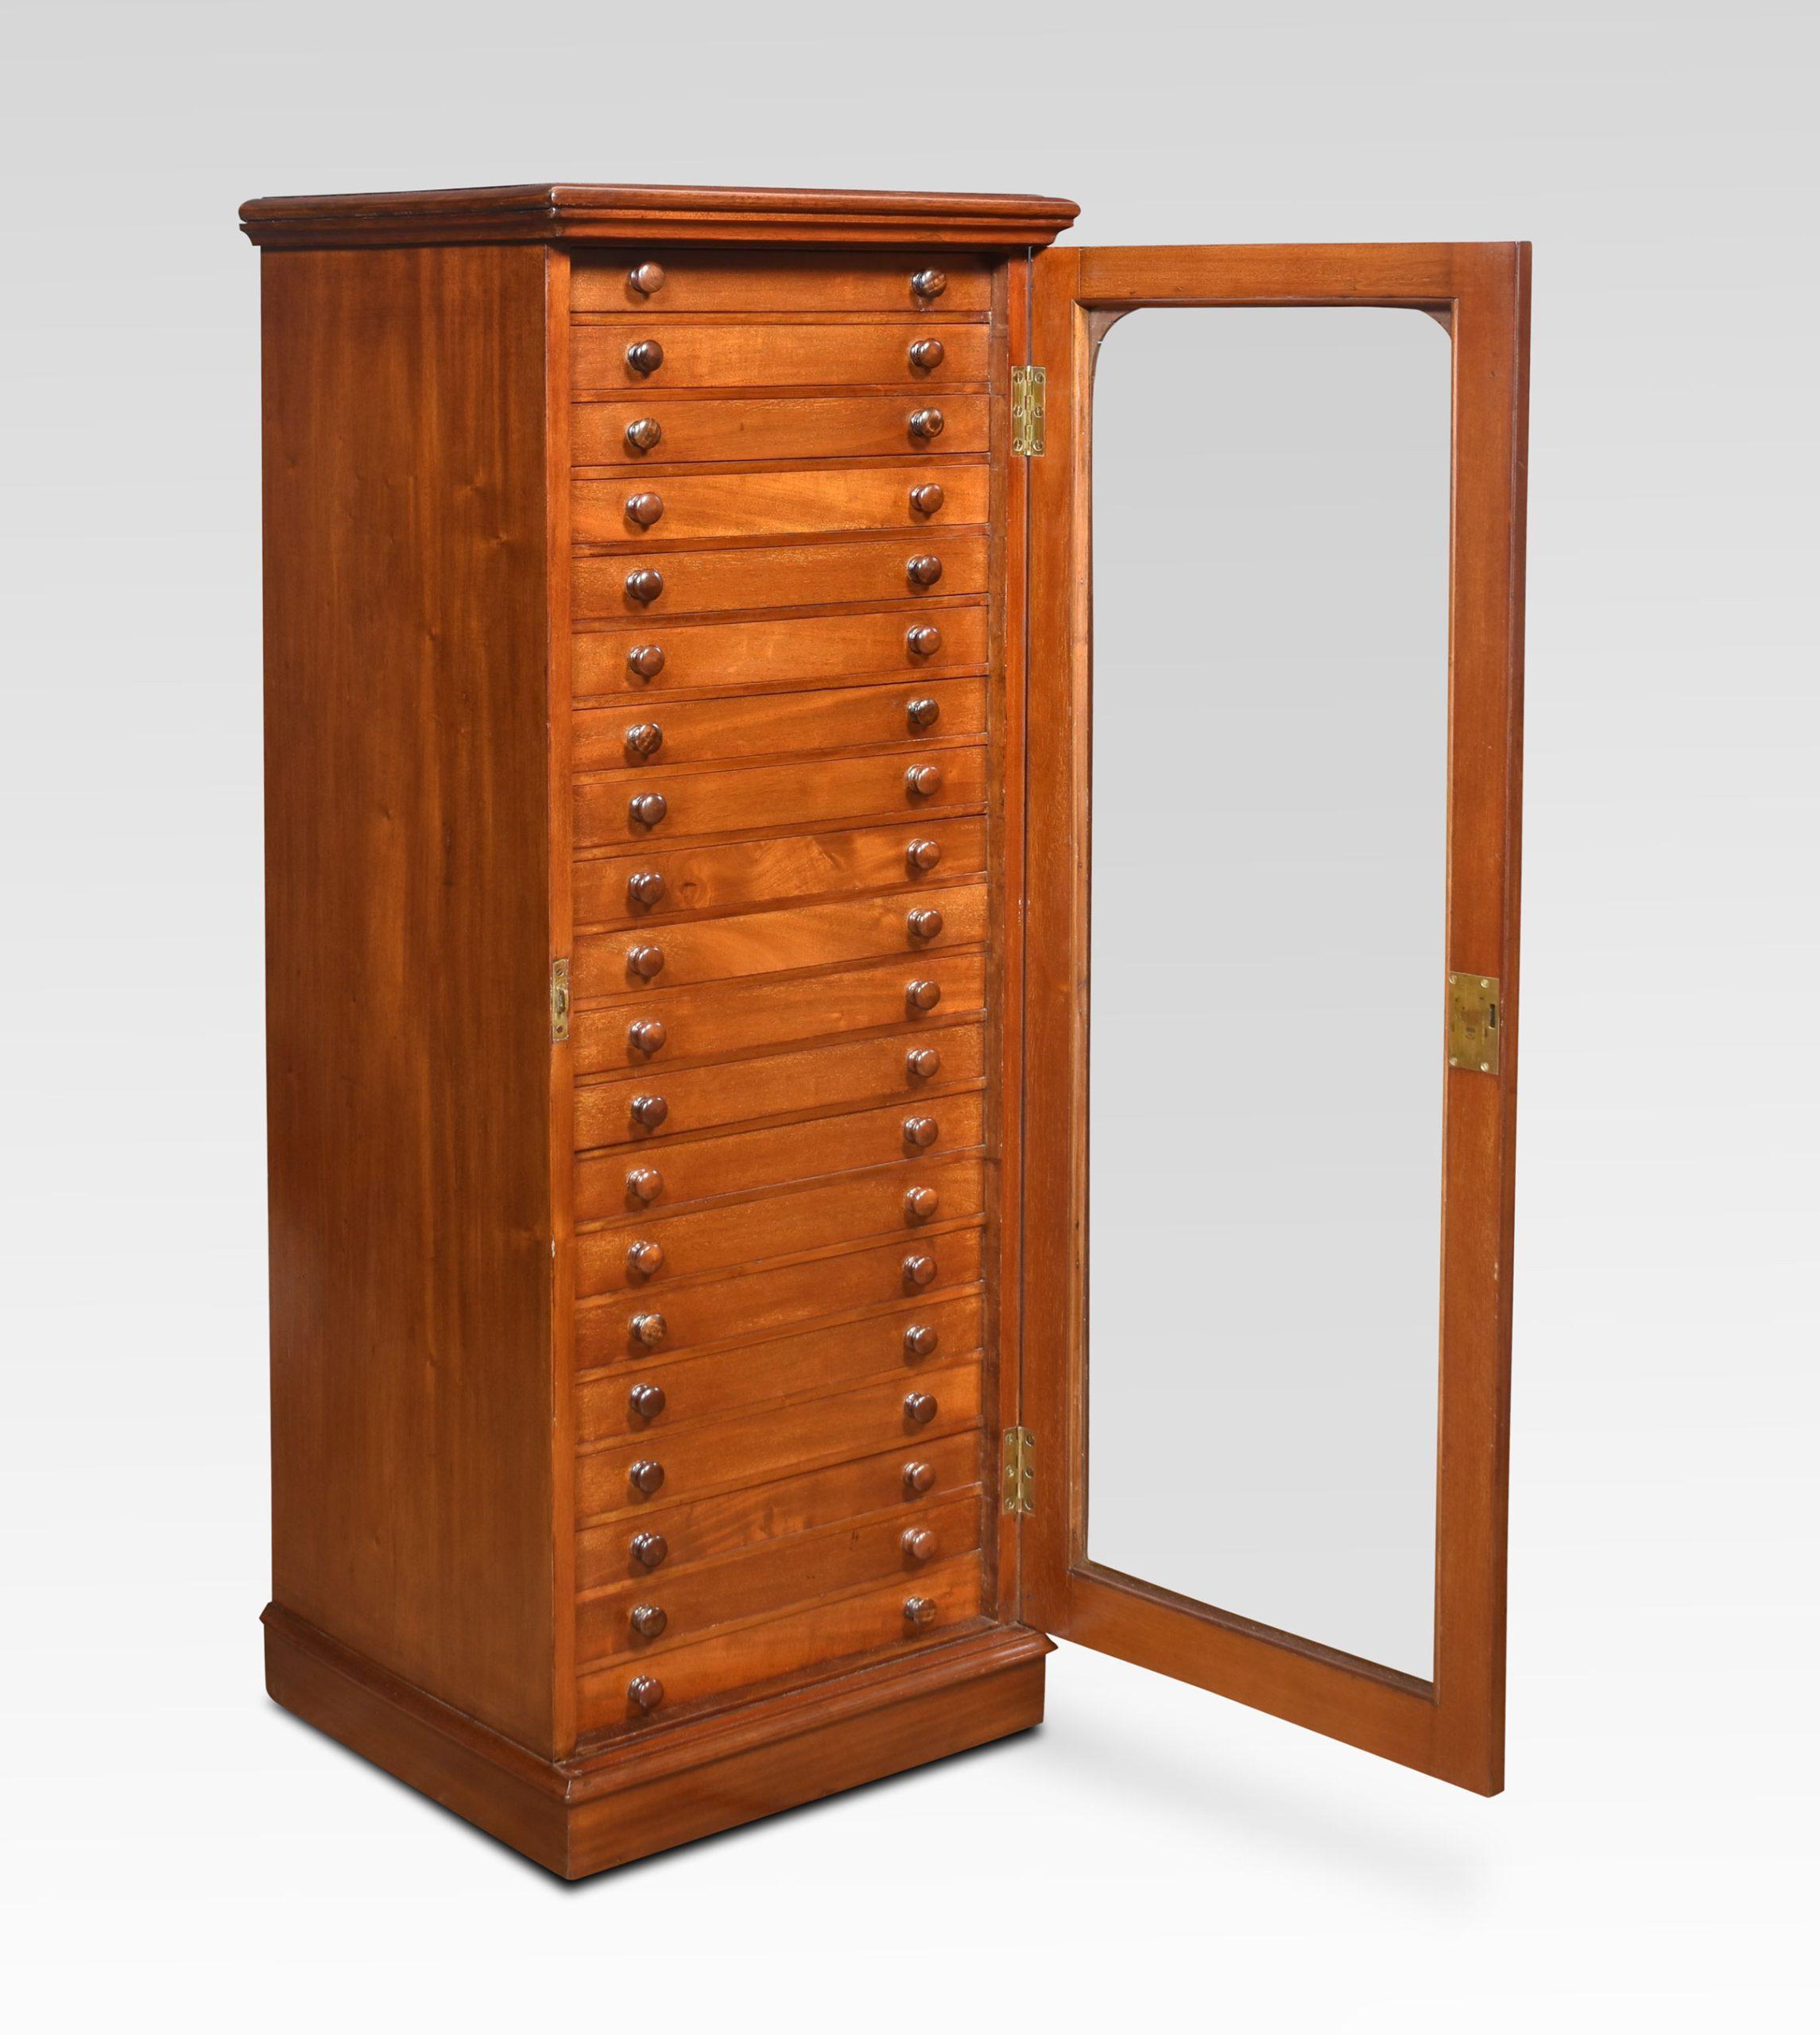 Mahogany collectors cabinet, the square top with moulded edge above large glazed door enclosing twenty drawers with glazed covers and mahogany knobs the internal height of the drawers is one inch. All raised up on a plinth base.
Dimensions
Height 53